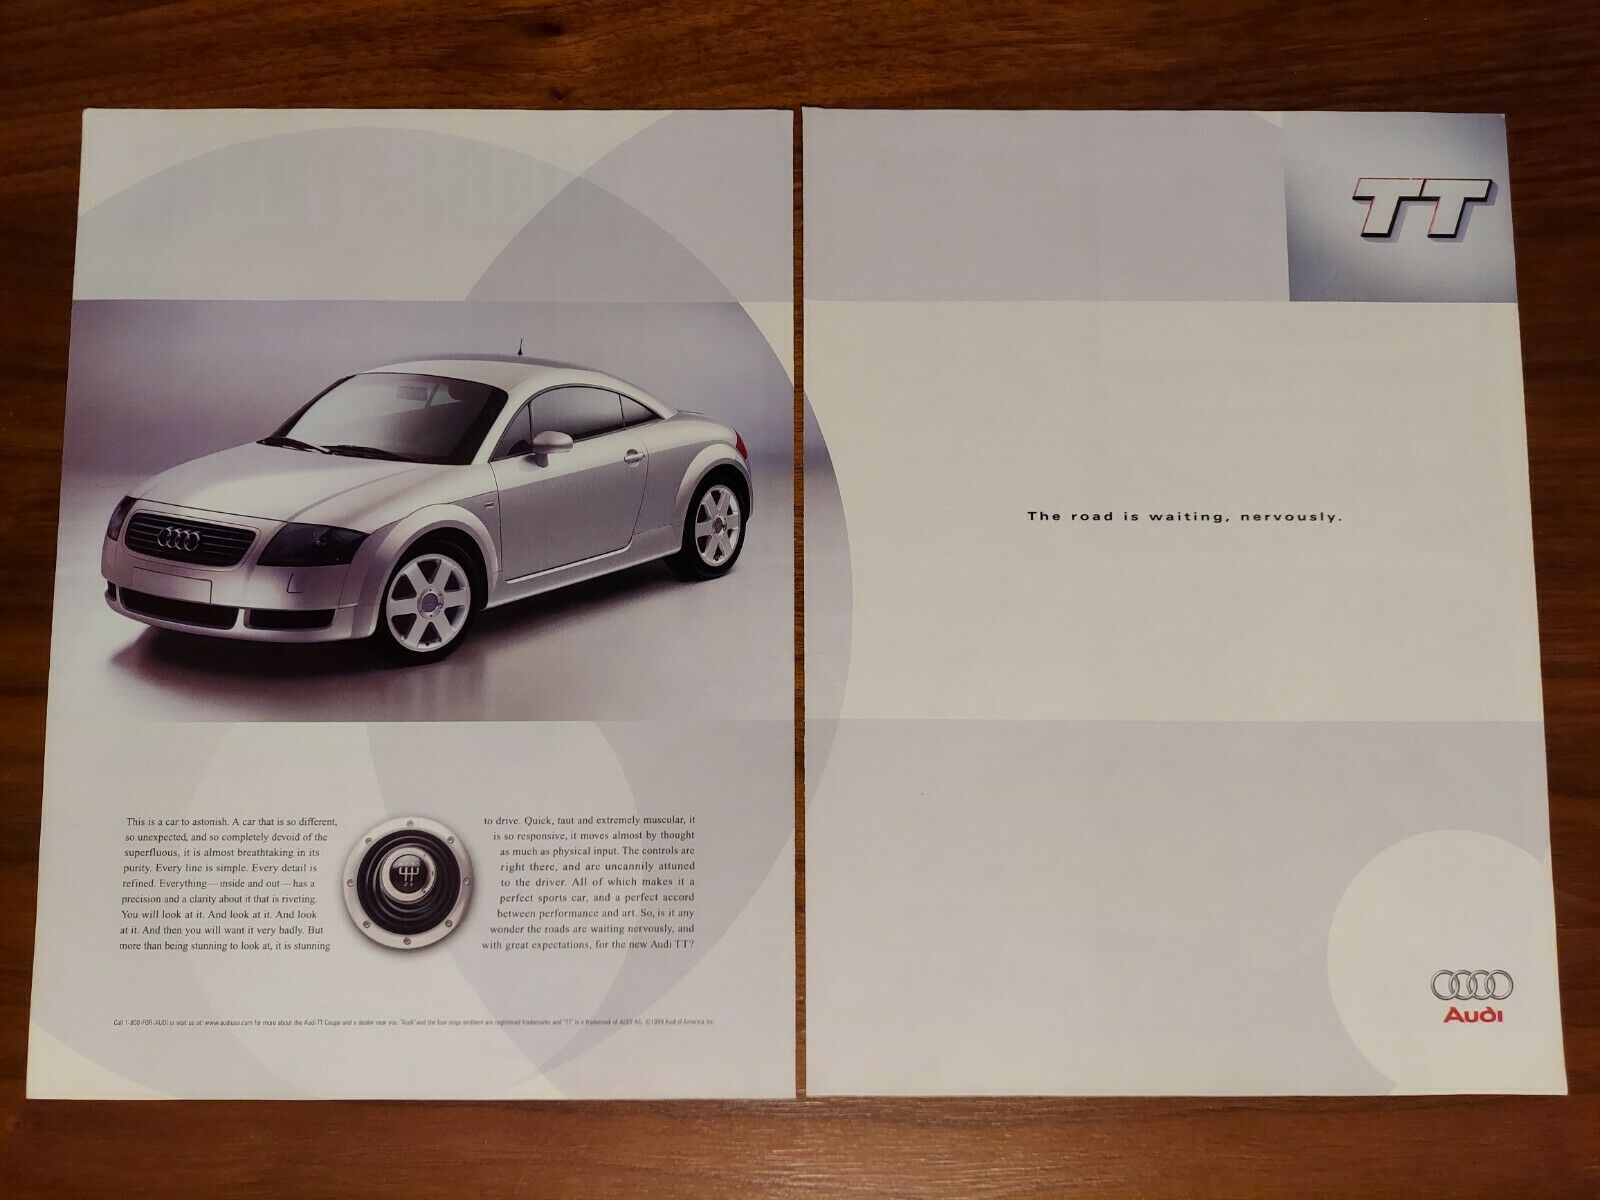 Audi Tt Magazine Advertisement The Road Is Waiting Nervously Print Ad